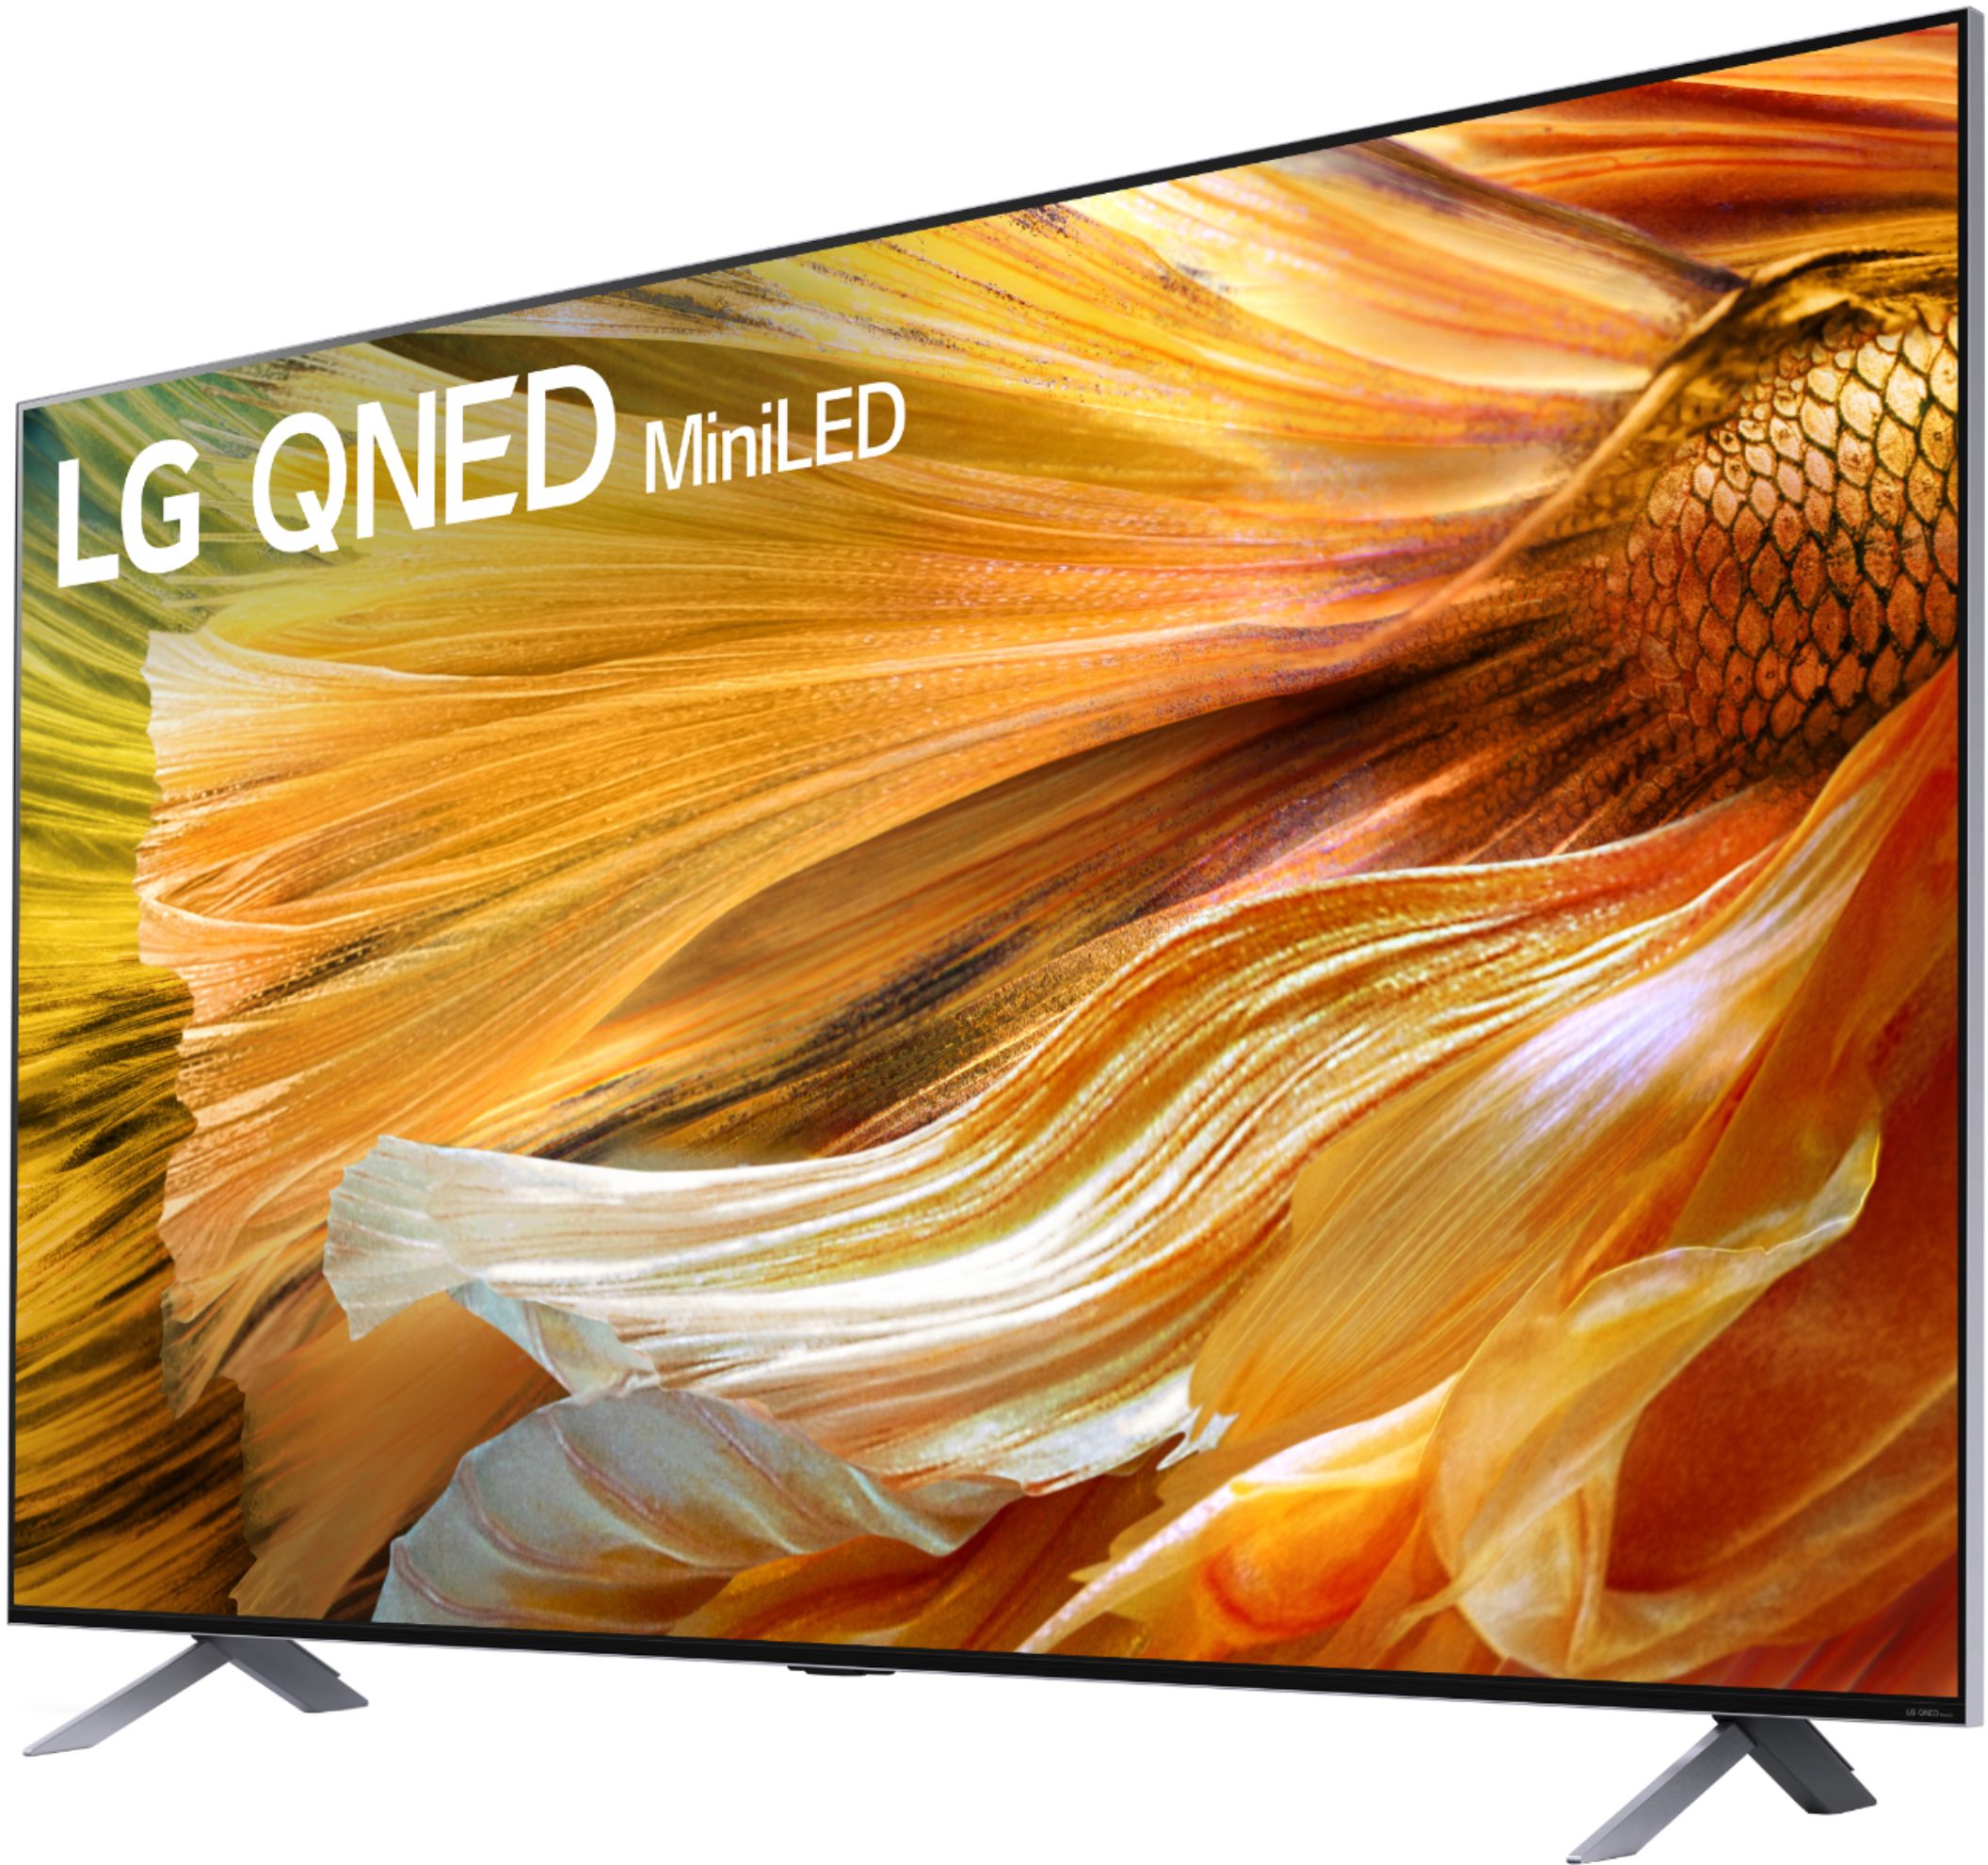 2021 8K LG QNED MiniLED 99 Series and 4K QNED MiniLED 90 Series  specifications and features